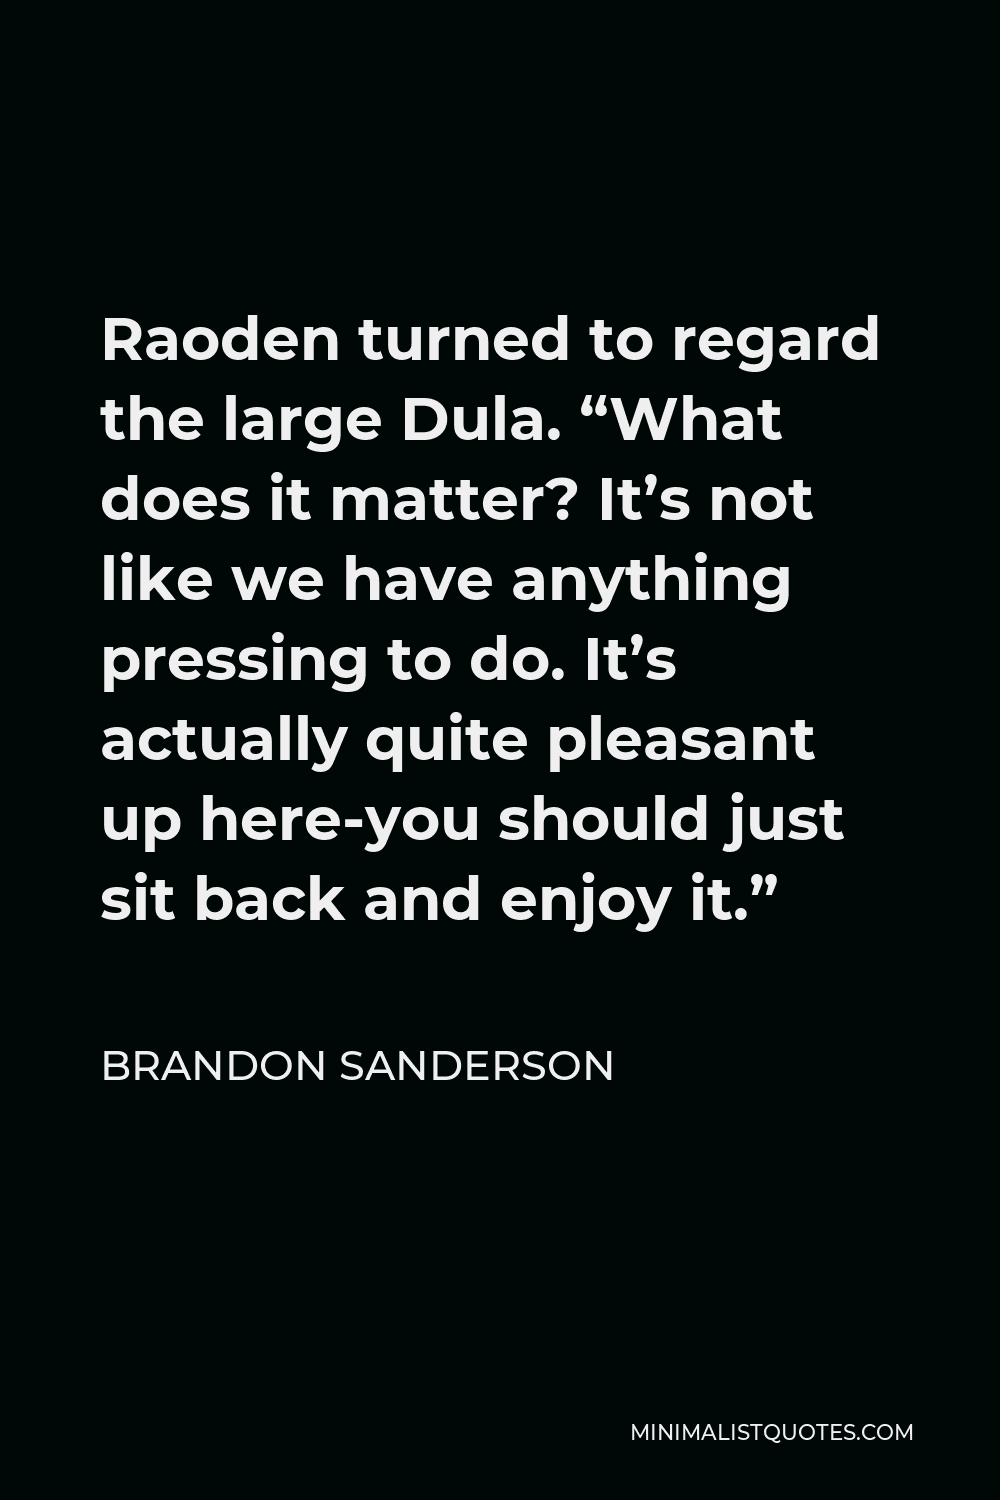 Brandon Sanderson Quote - Raoden turned to regard the large Dula. “What does it matter? It’s not like we have anything pressing to do. It’s actually quite pleasant up here-you should just sit back and enjoy it.”